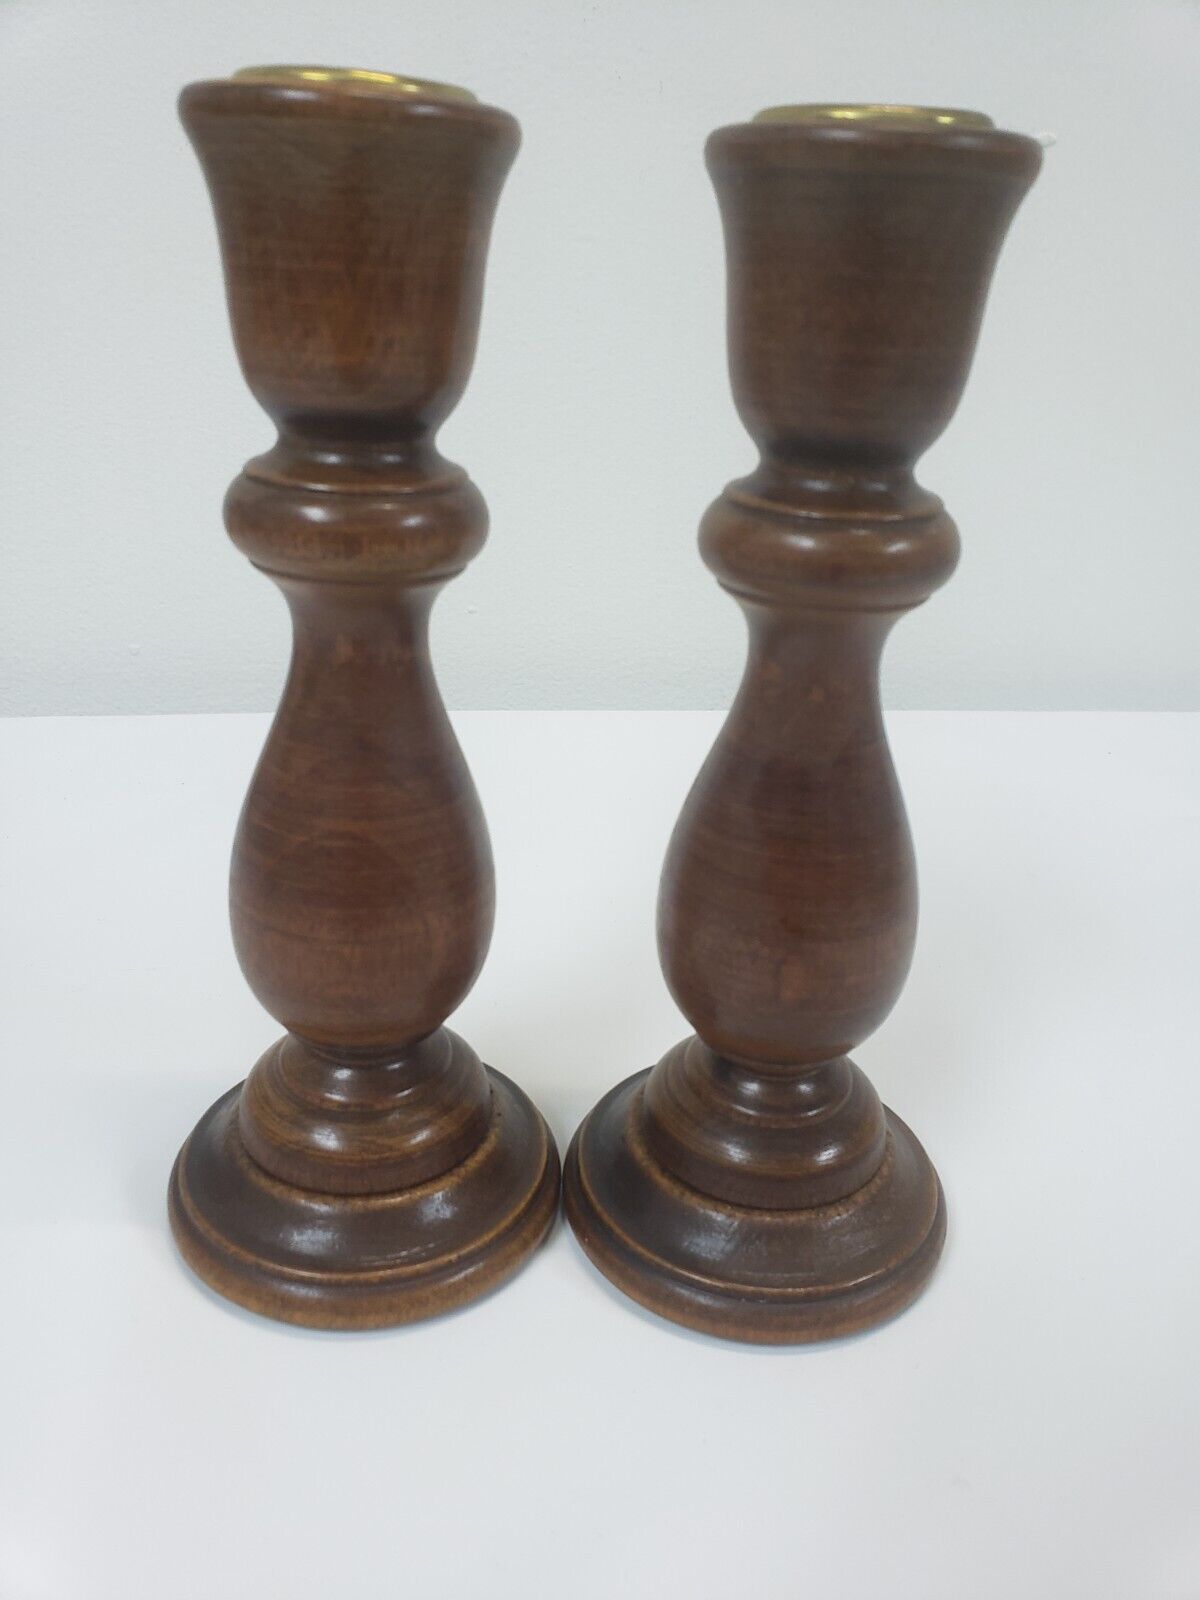 2 Vintage Wooden Candlestick Holders 7 inch high